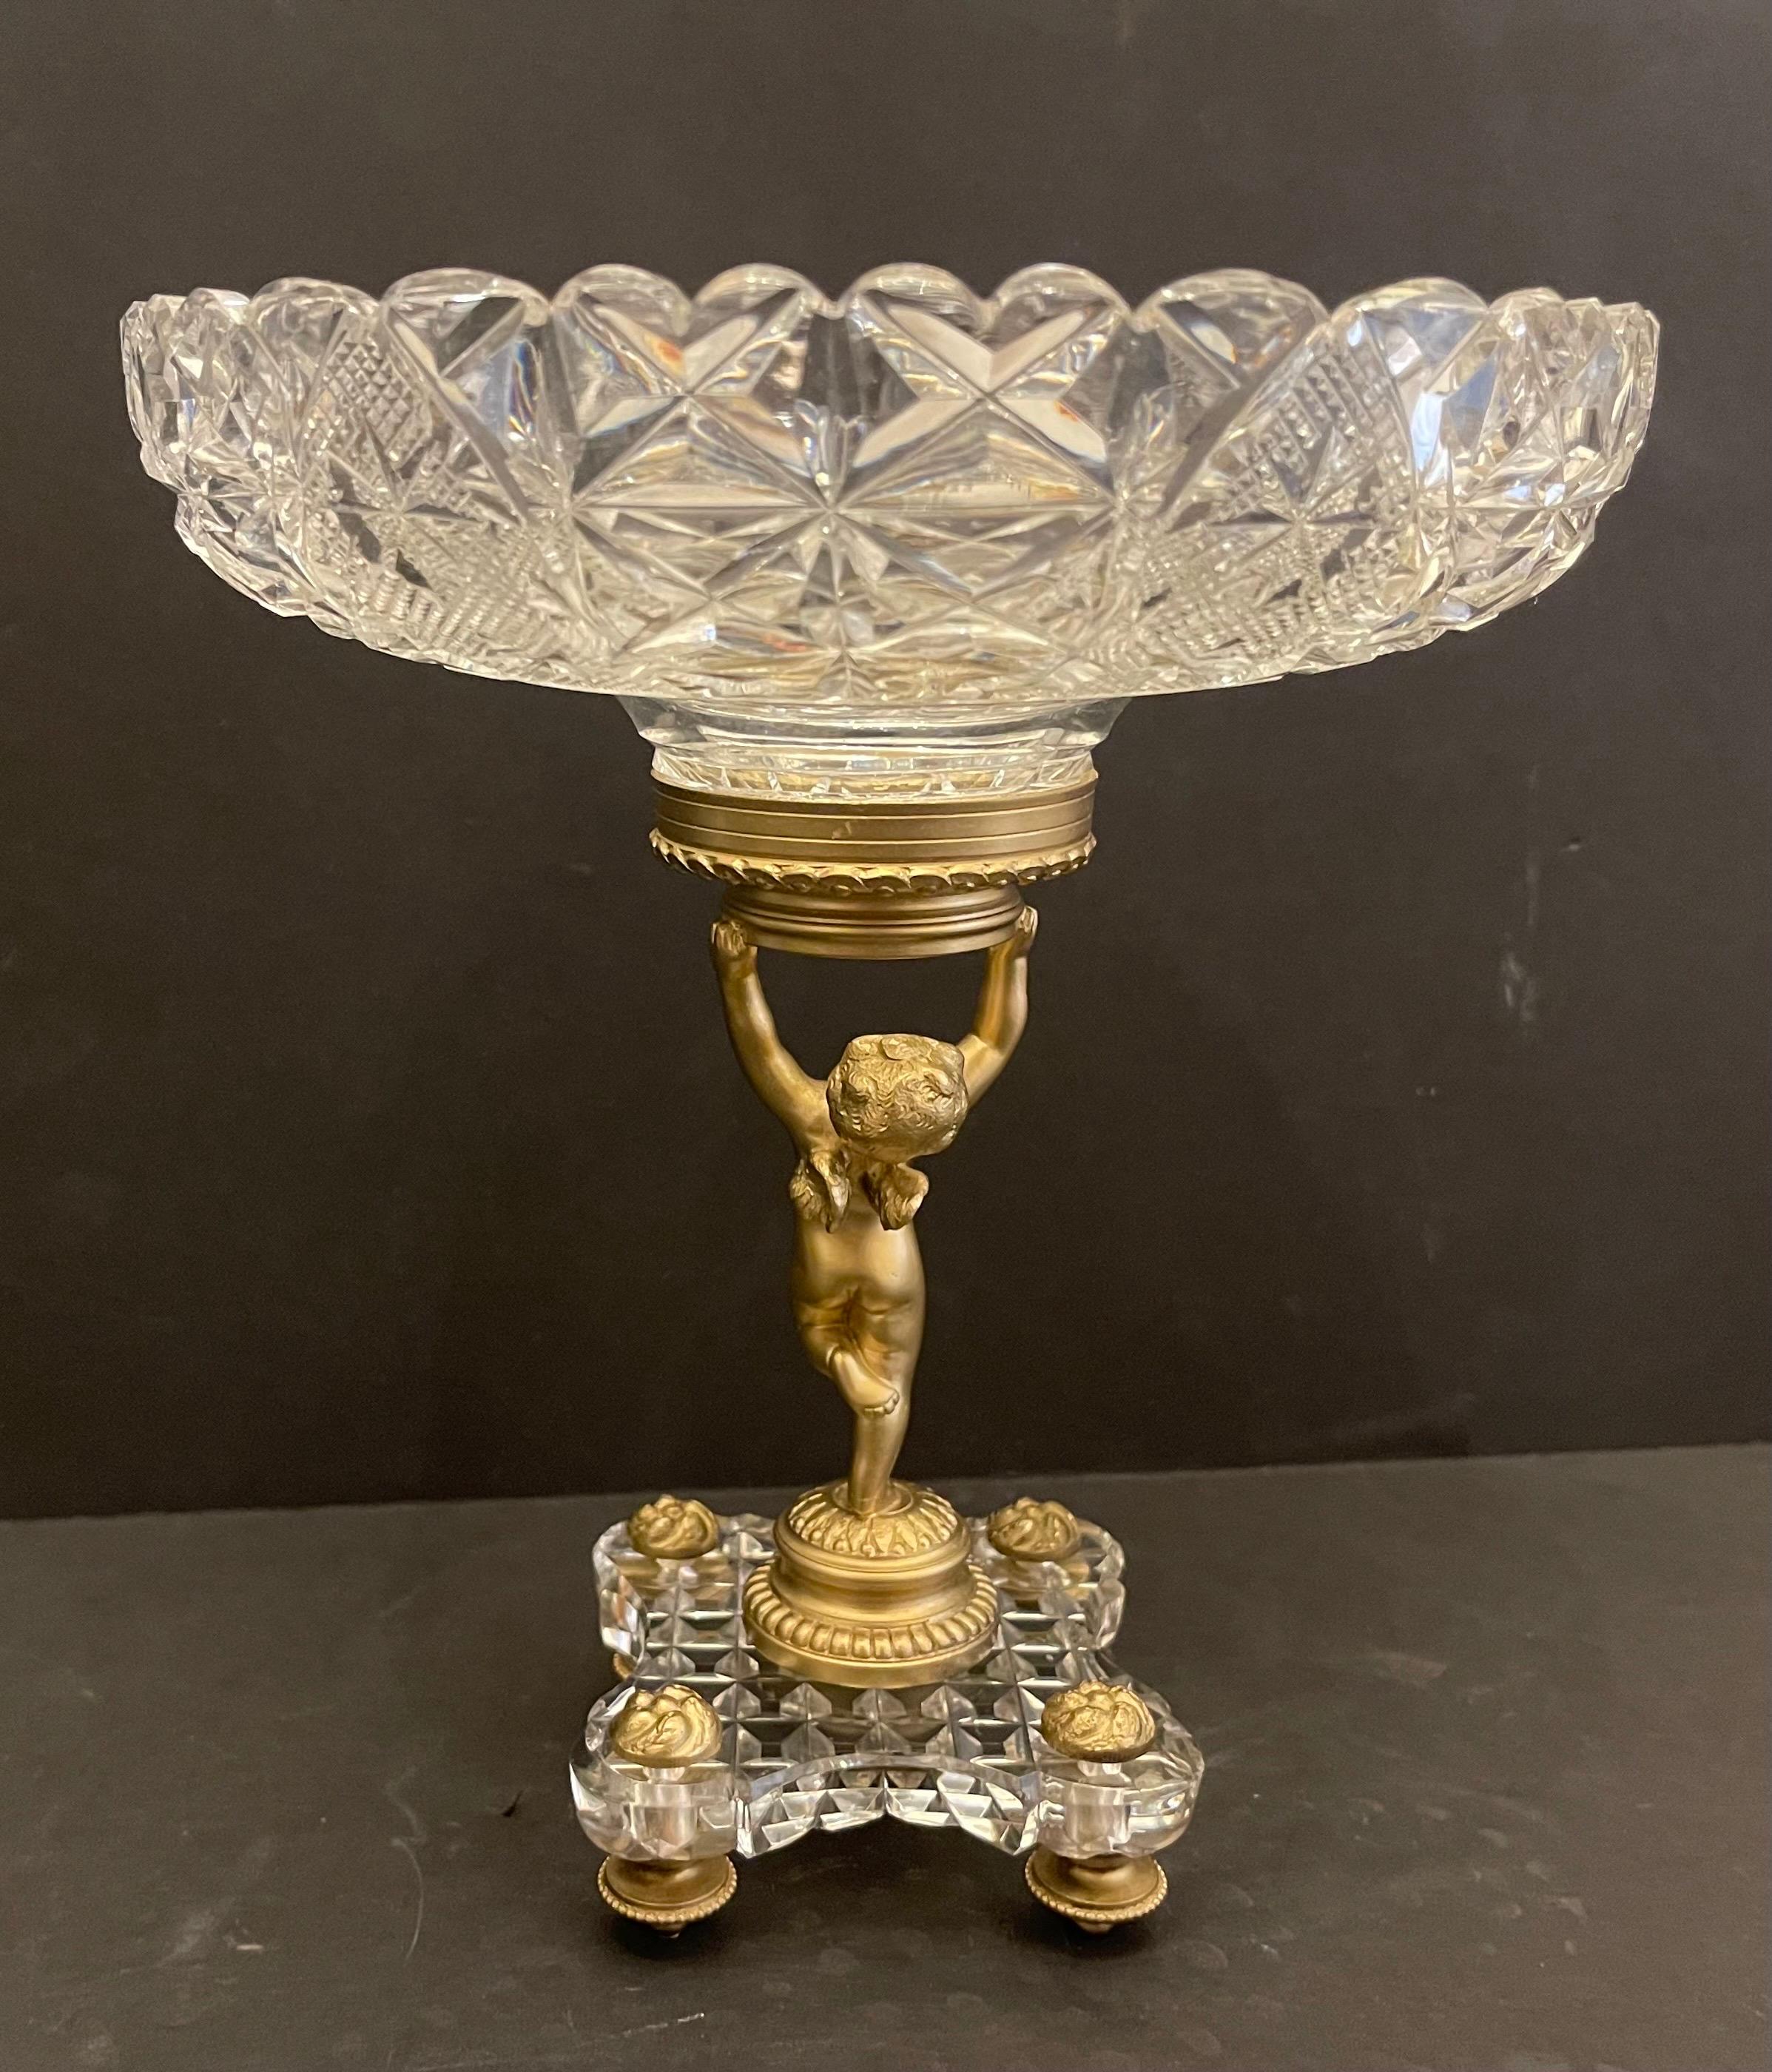 Wonderful French Baccarat Bronze Crystal Ormolu Cherub Putti Compote Centerpiece In Good Condition For Sale In Roslyn, NY